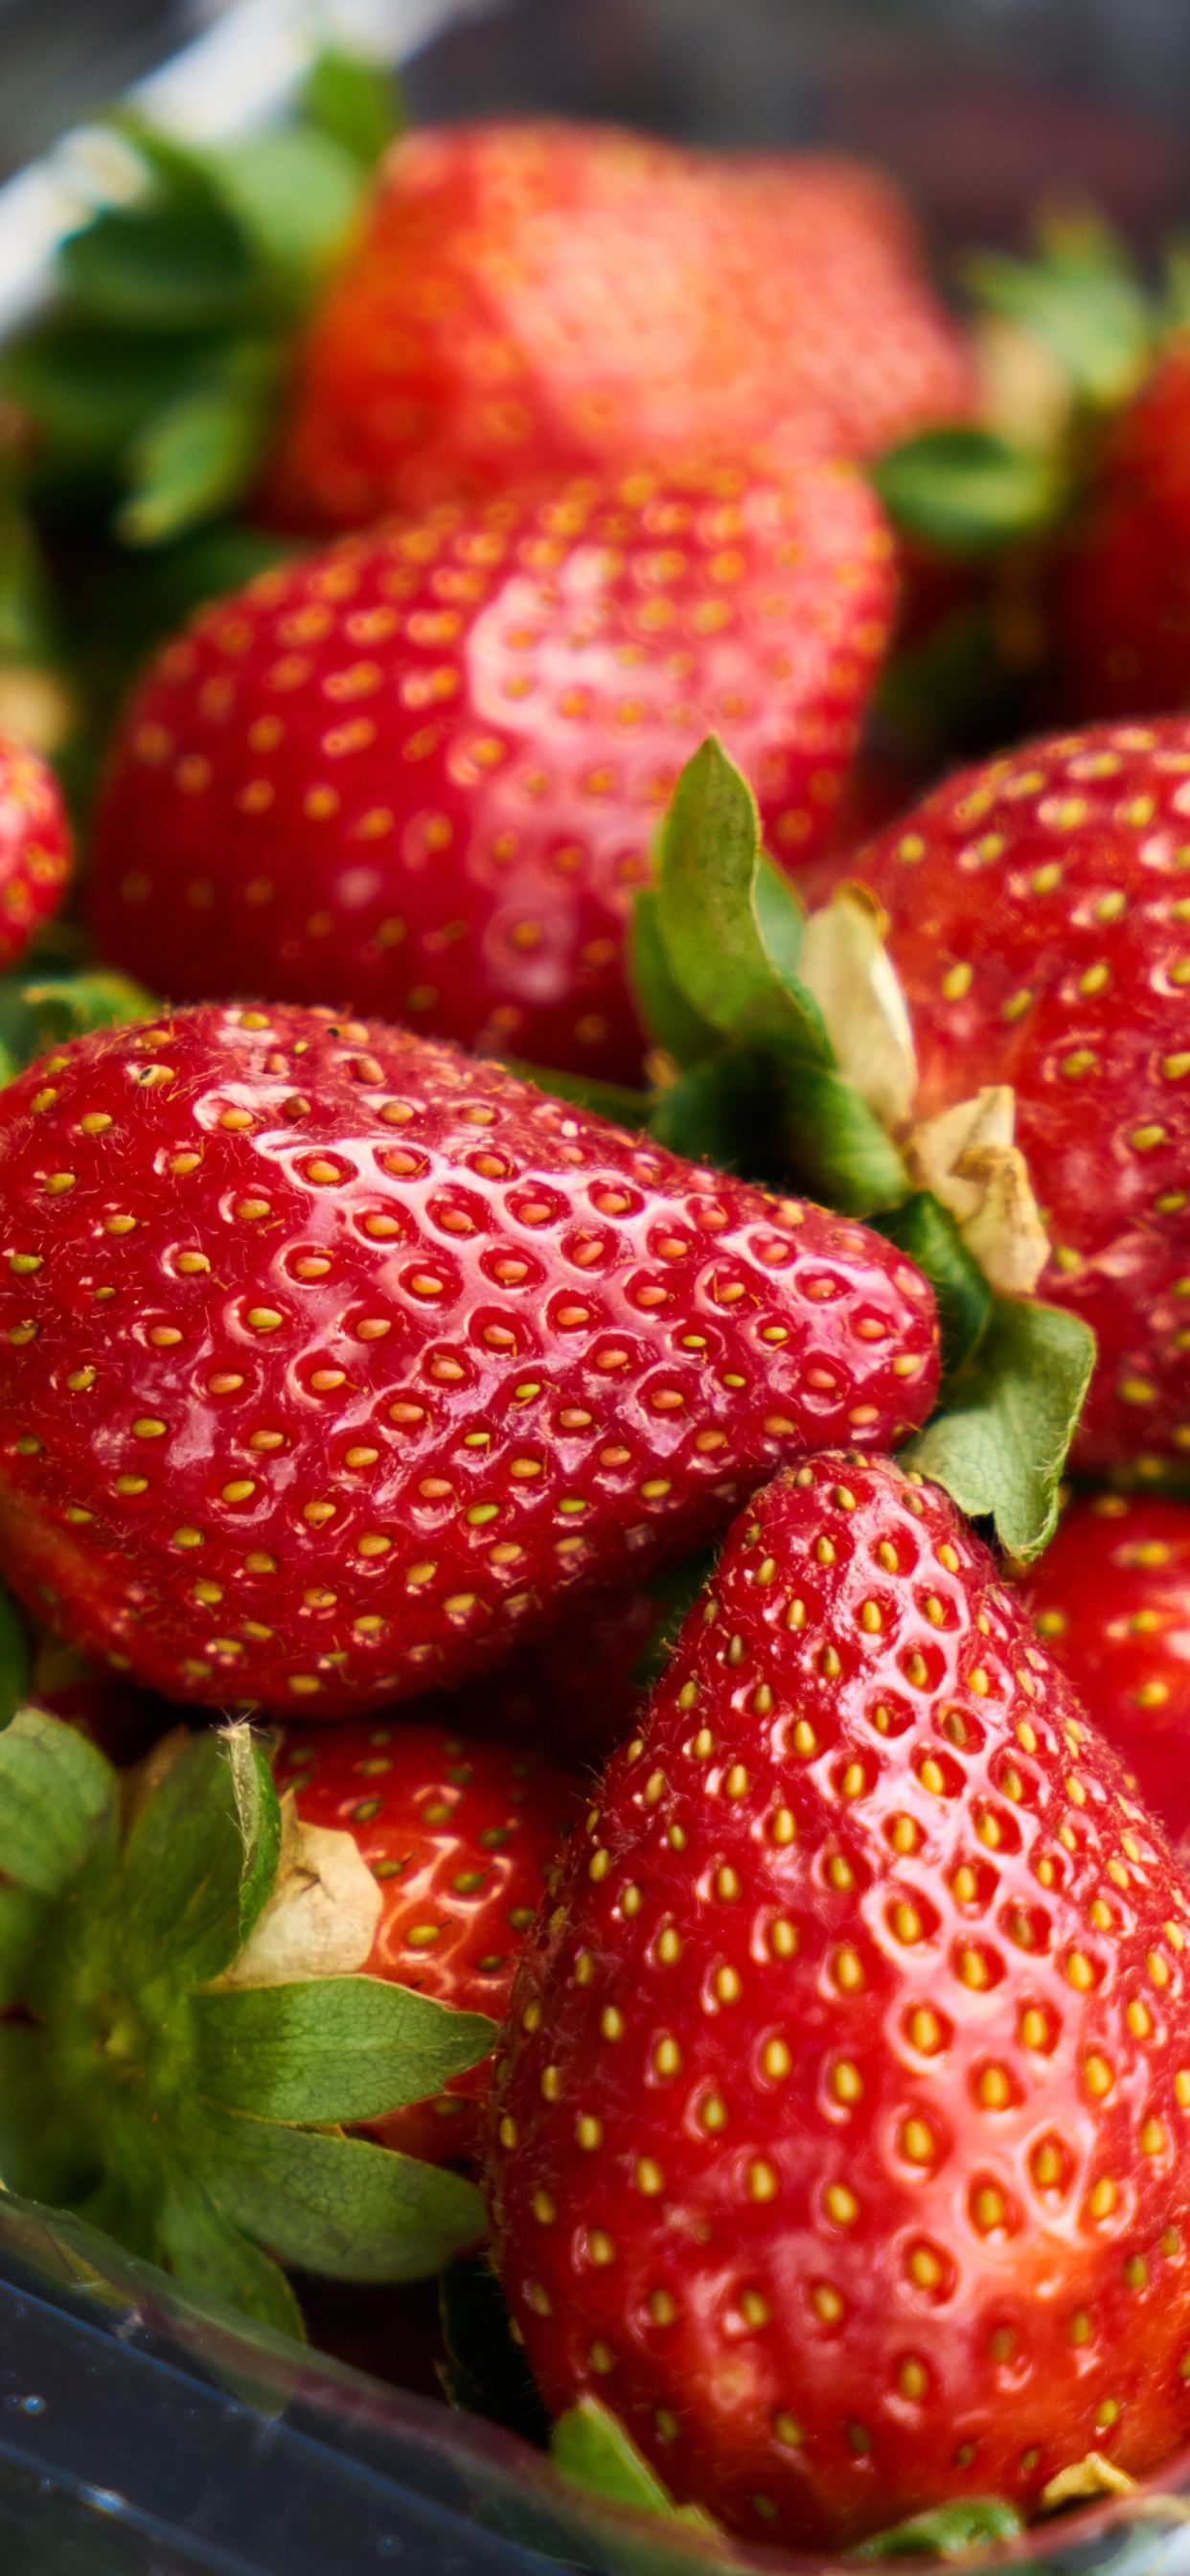 Strawberries on Stainless Steel Tray. Wallpaper in 1242x2688 Resolution